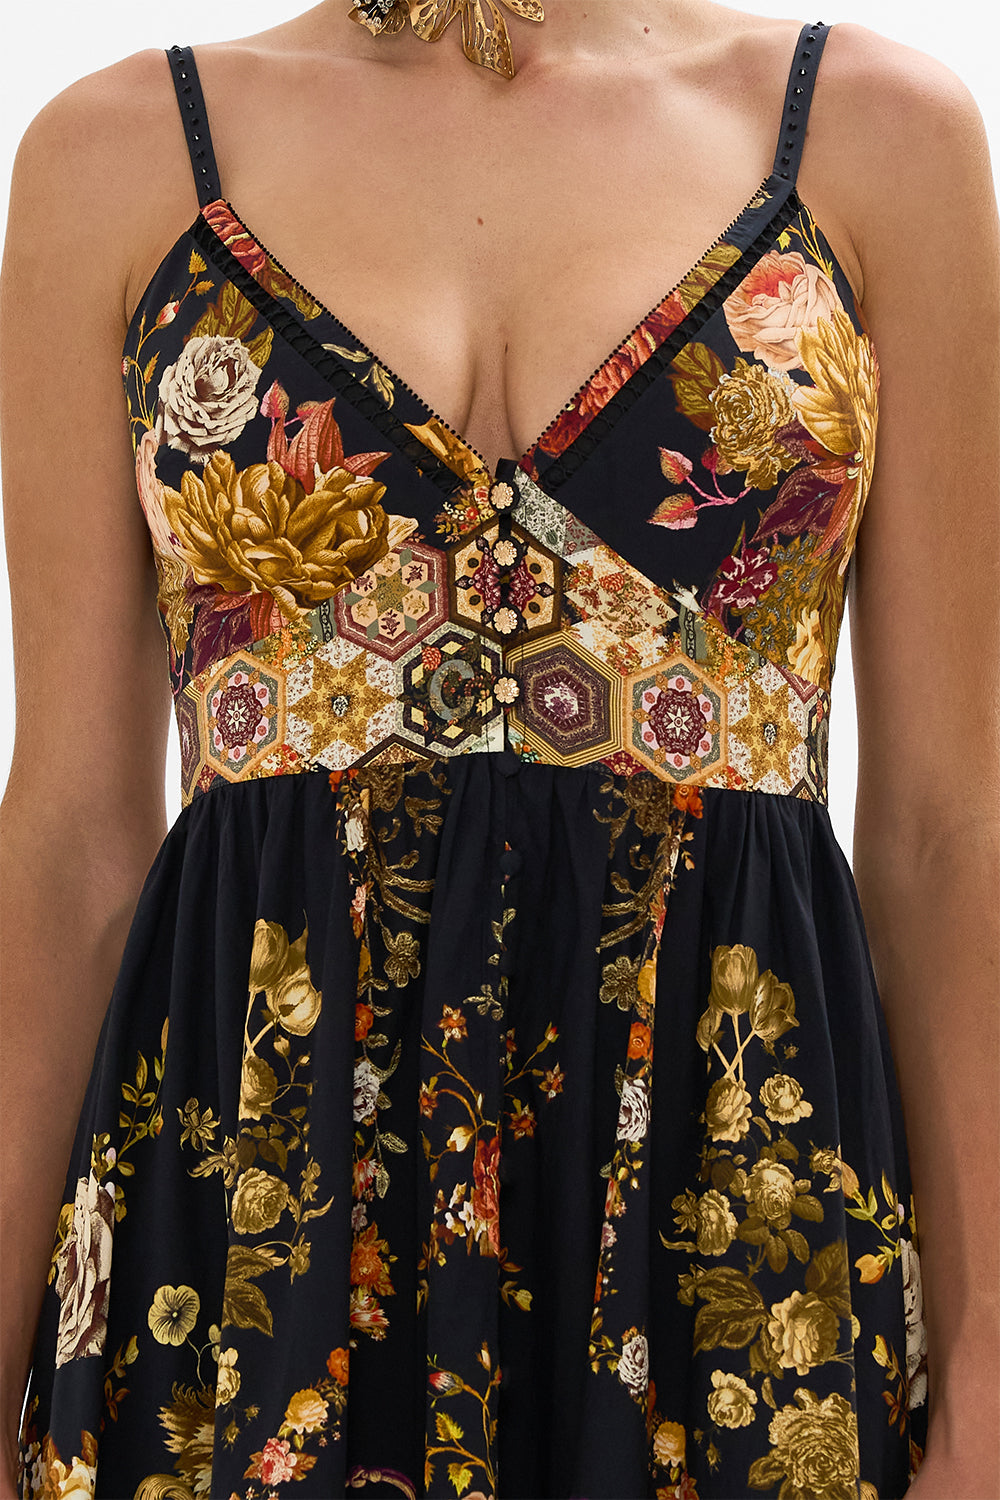 CAMILLA floral tiered bodice dress in Stitched in Time print.